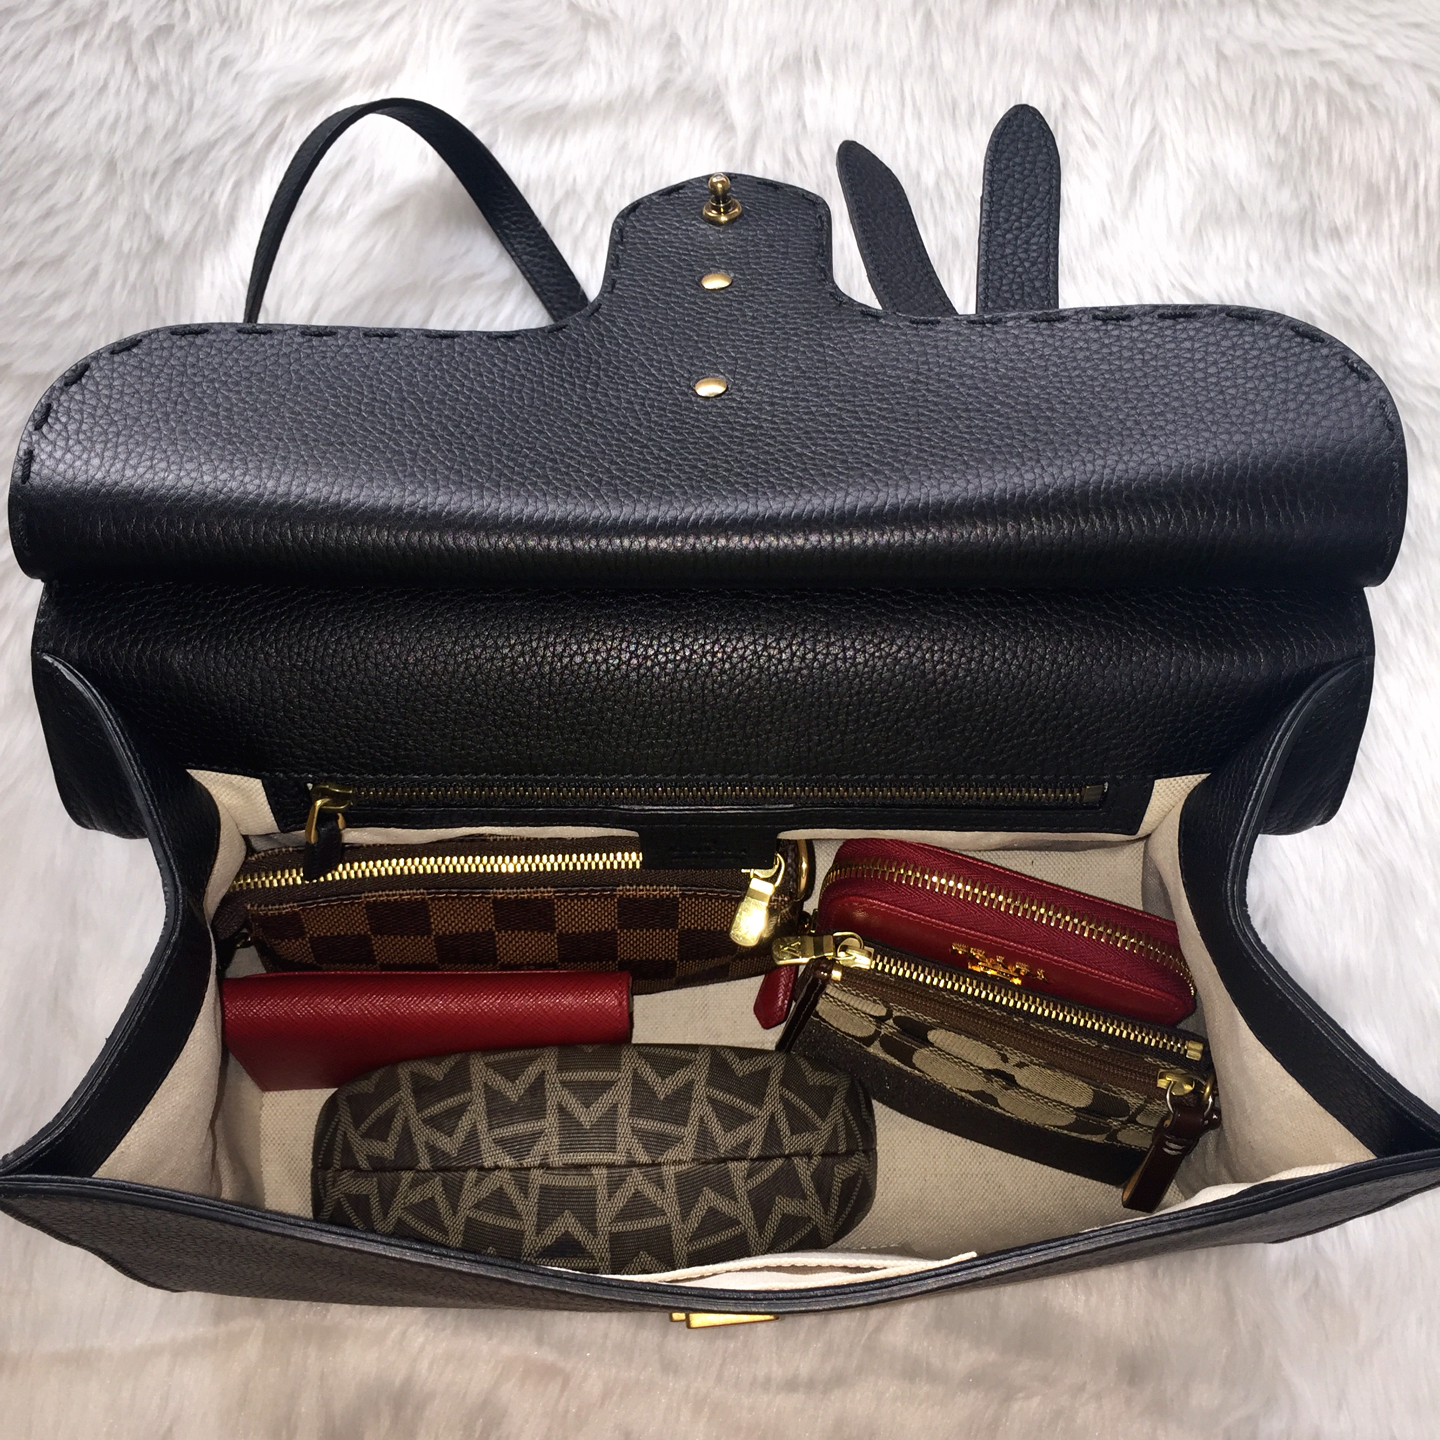 Review: Gucci Marmont Top Handle Bag – My Bag Files